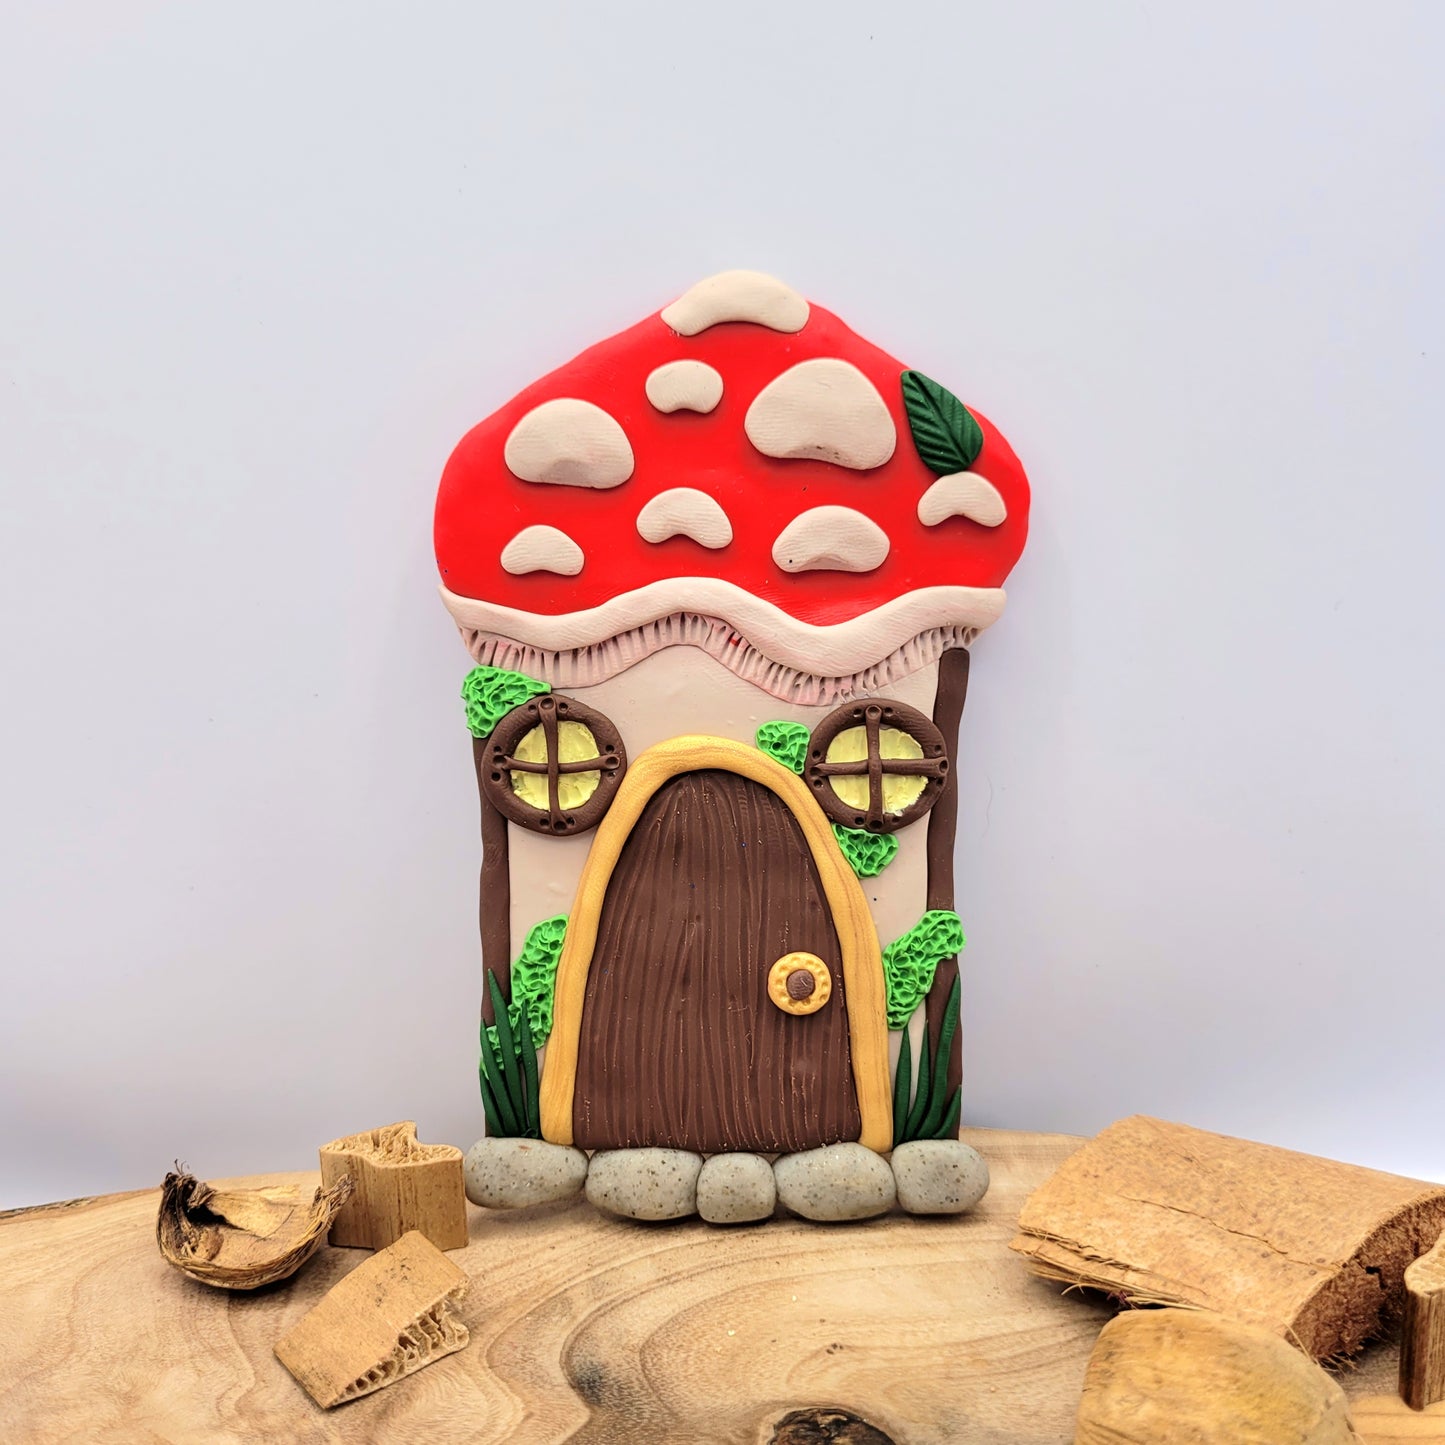 The mushroom door rests on an oak wood platform with dried wood pieces. The mushroom's cap is bright red with beige textured spots and a green leaf. The stem of the mushroom is beige and is detailed with two windows, a door, green moss and grass, and a cobblestone step.